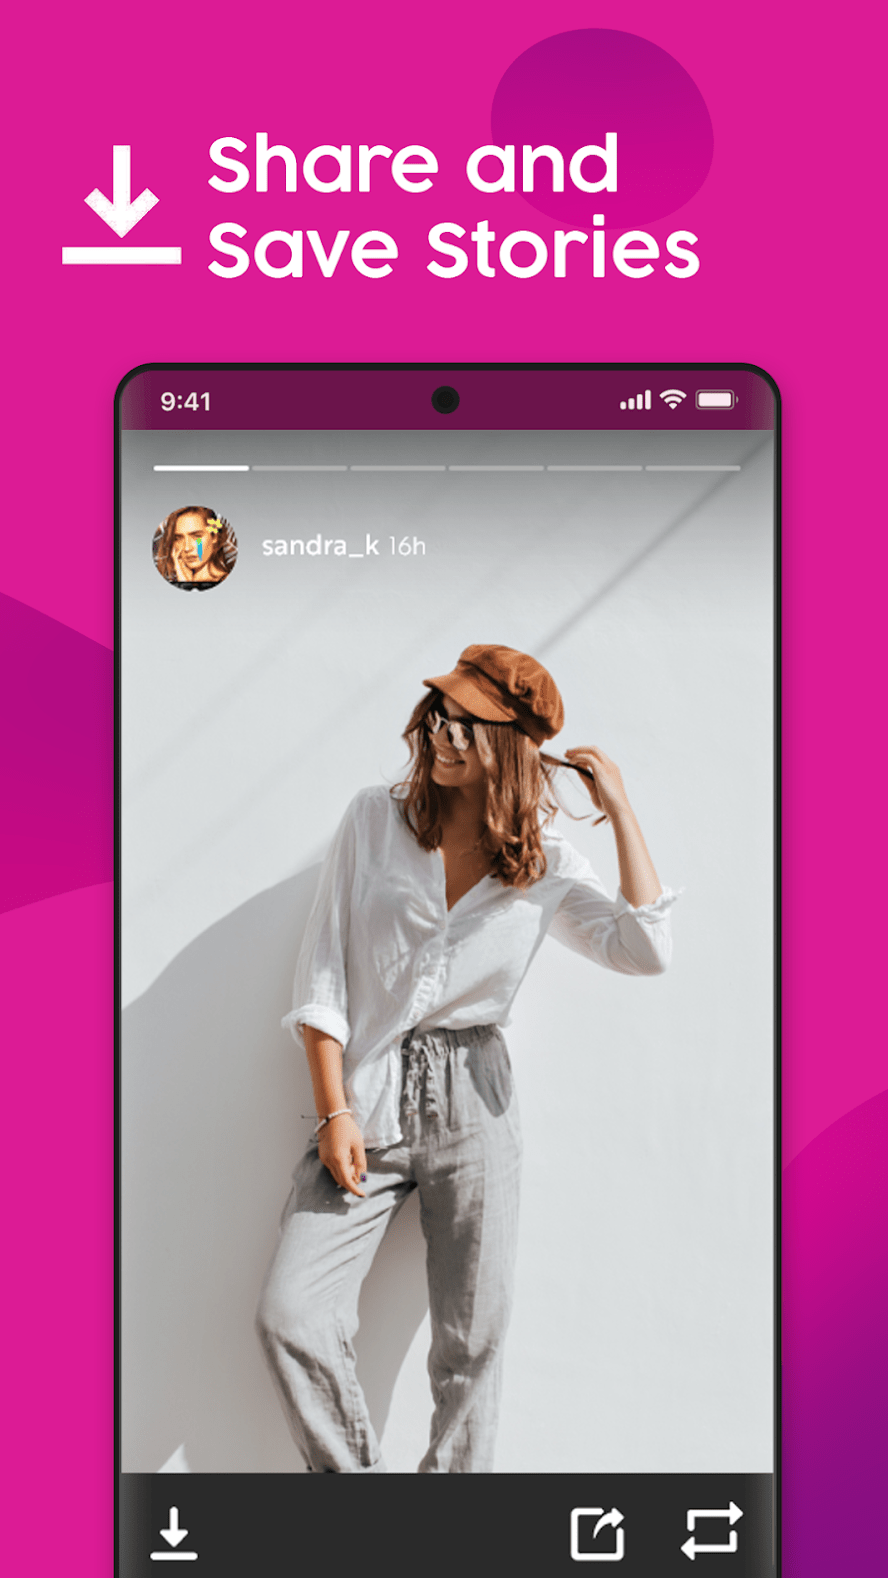 How to Watch Instagram Stories Anonymously